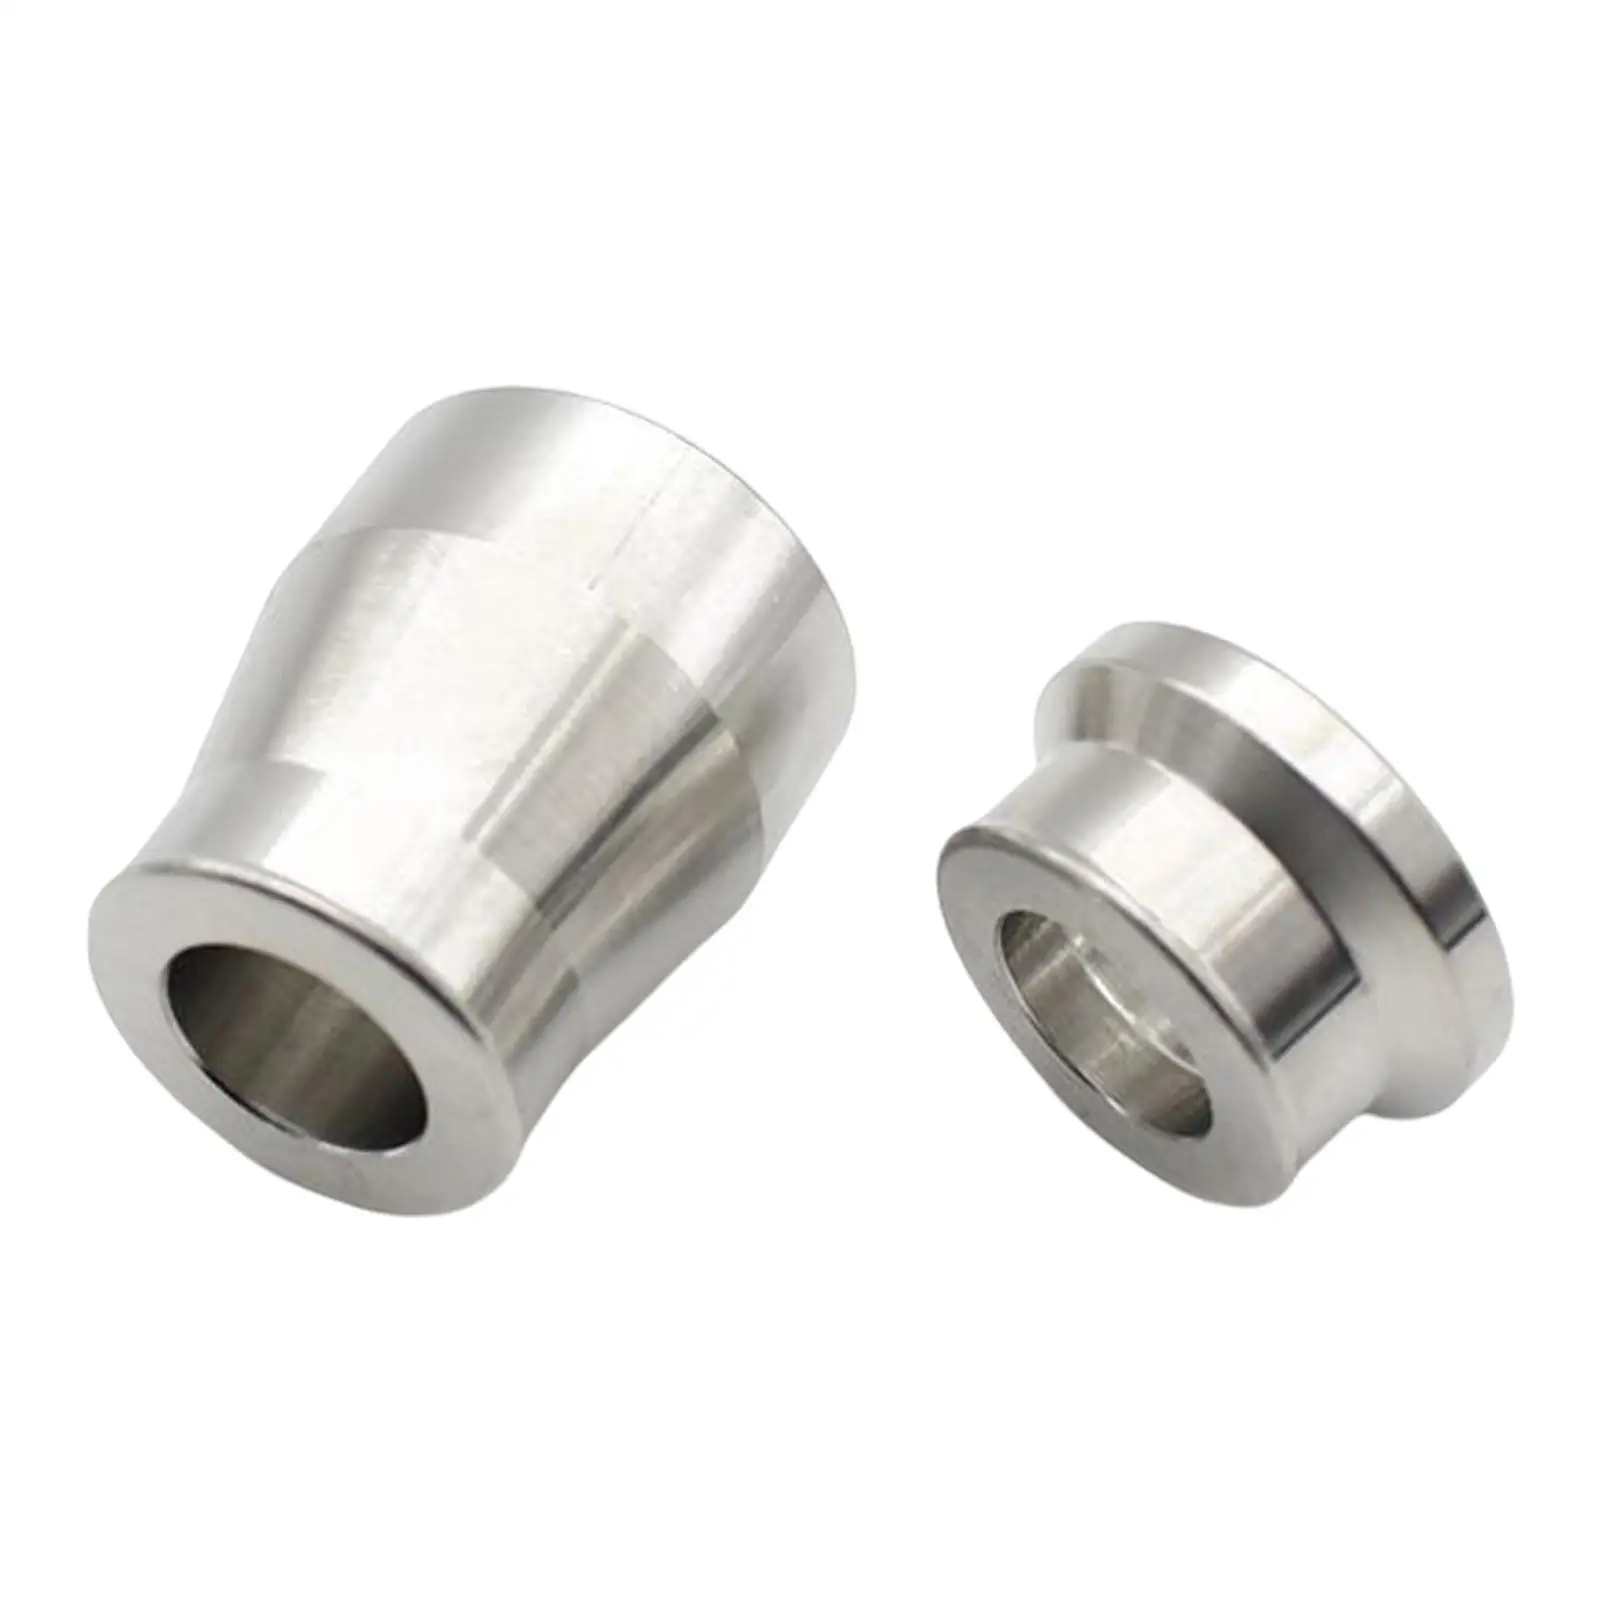 Bearings Hardened Reinforced Bushings Replacement Modified Front Wheel Bushings for Kymco Krv180